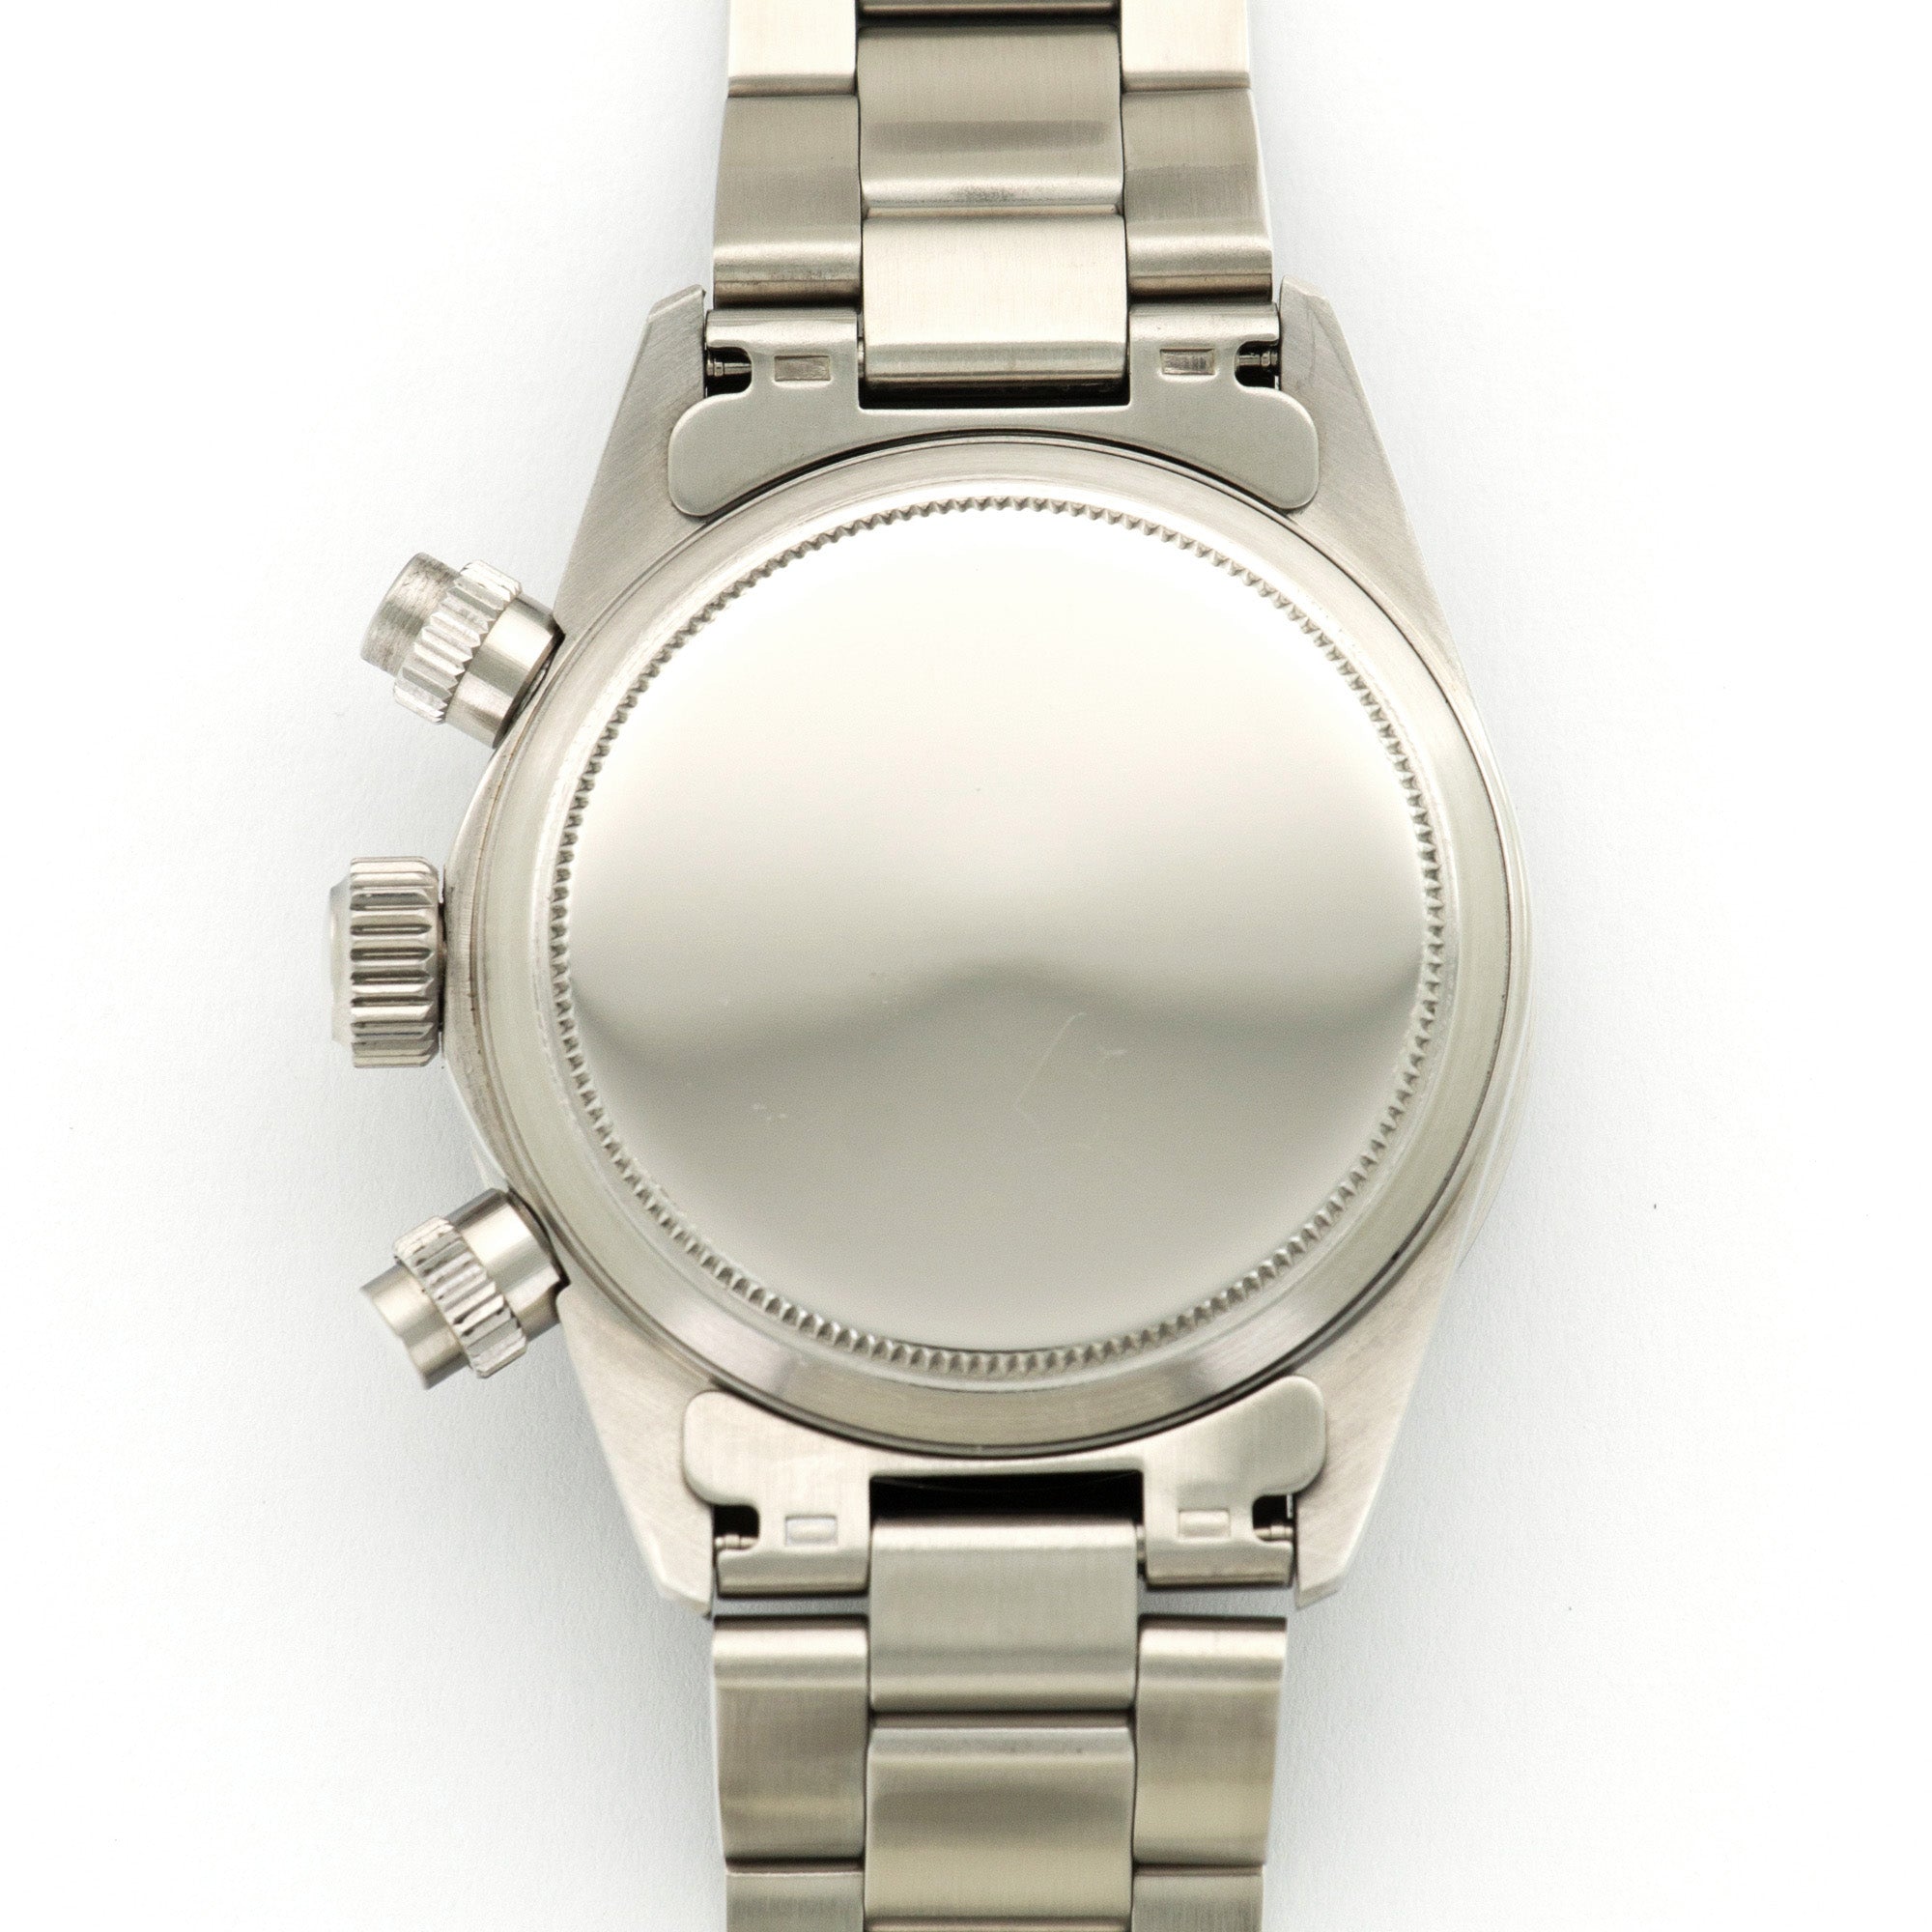 Gevril - Gevril Tribeca Paul Newman Watch - The Keystone Watches